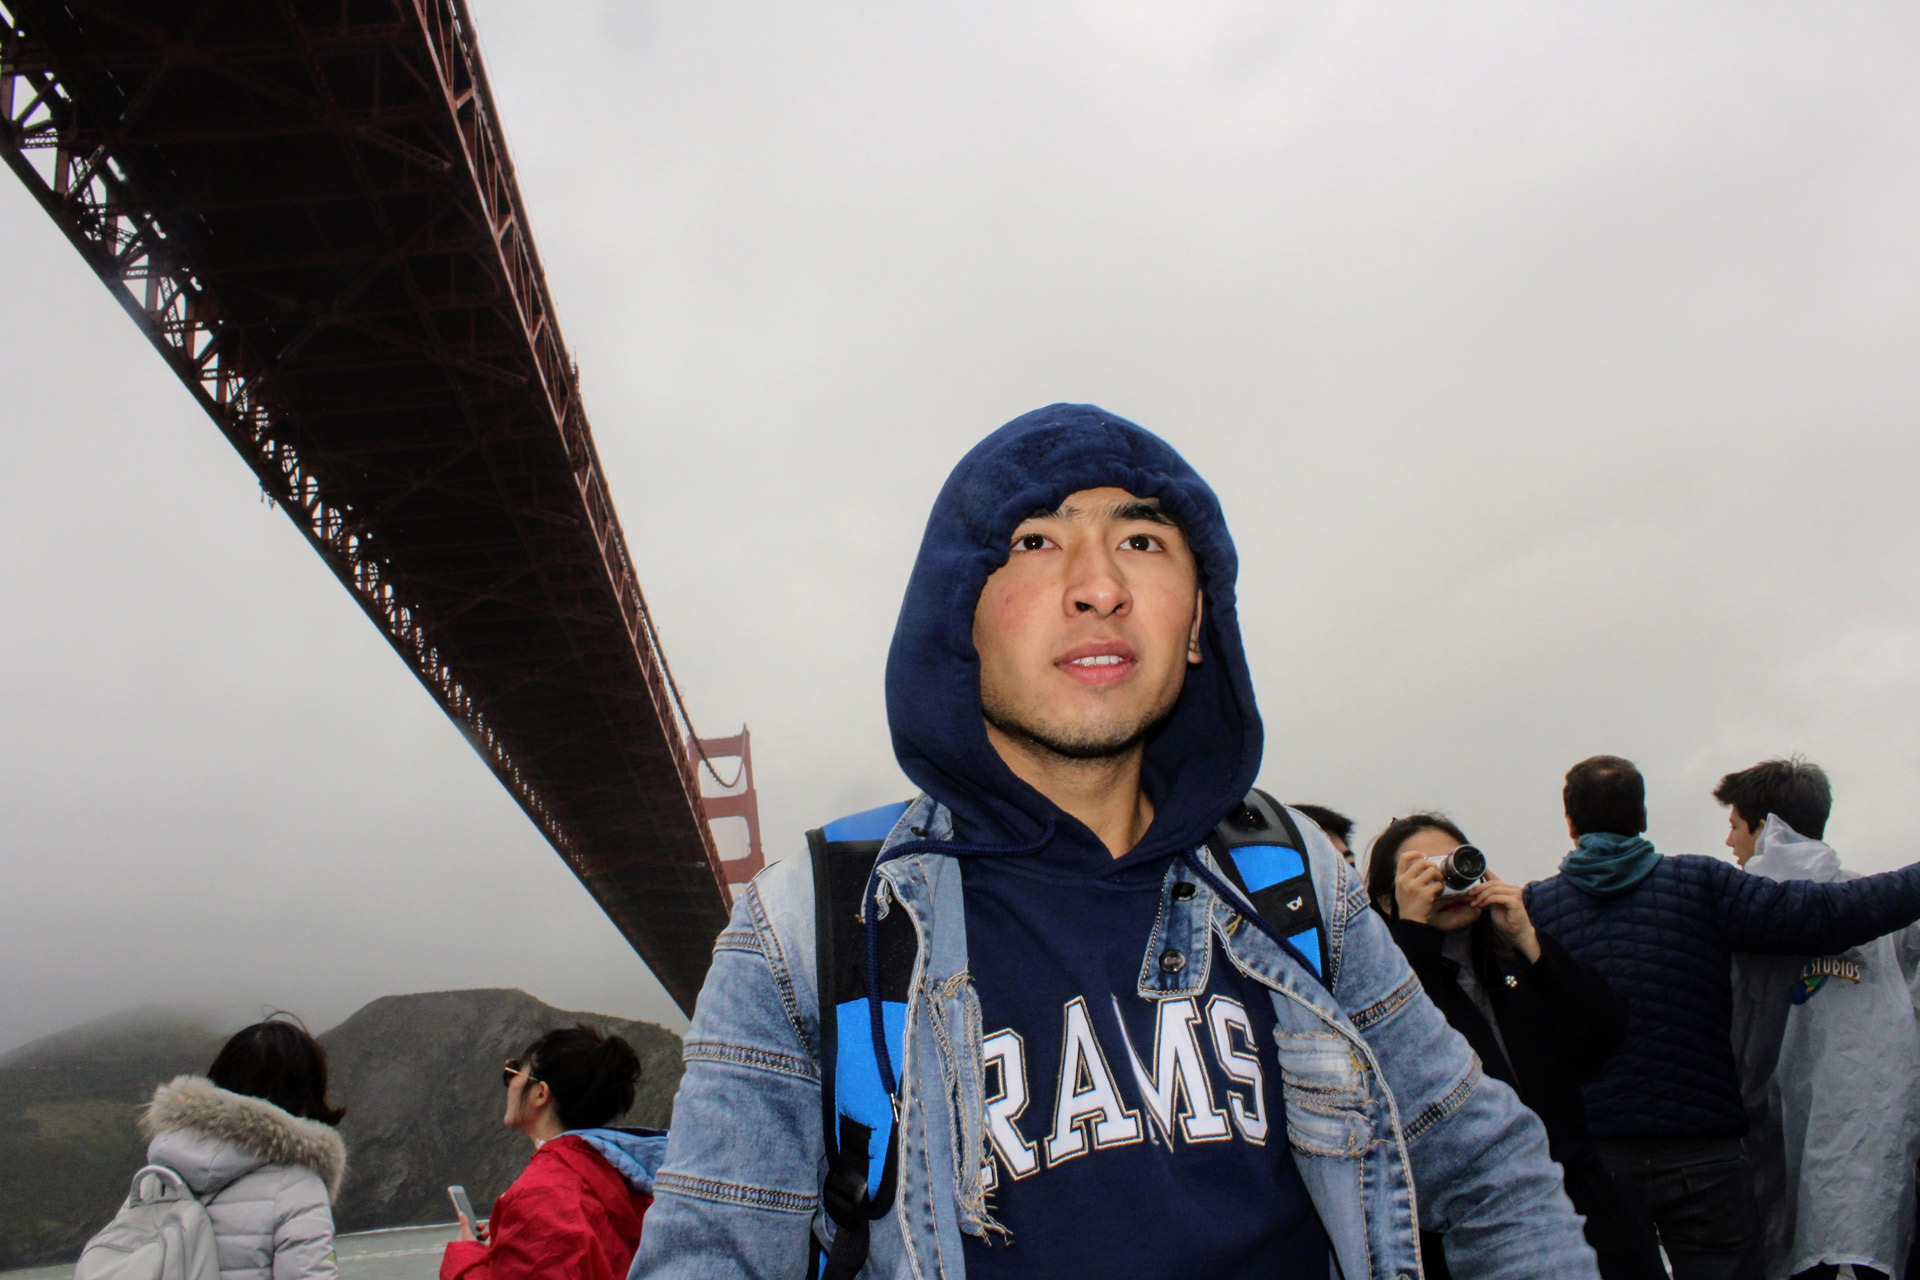 Dramatic scene of an international student wearing a hoodie on a foggy day cruise under the Golden Gate Bridge